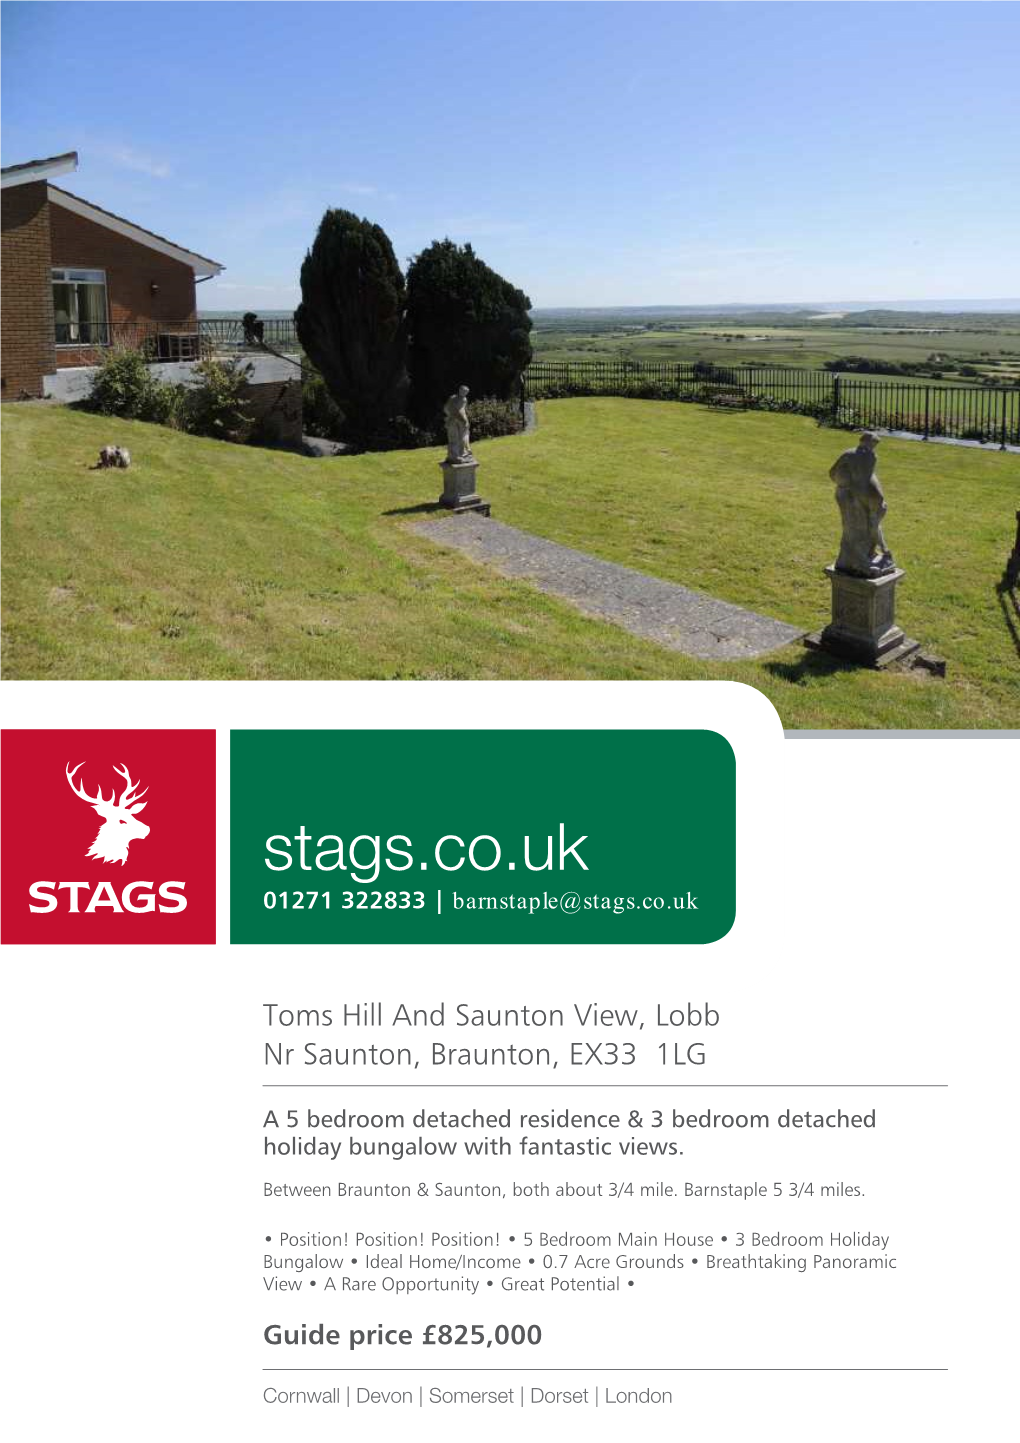 Stags.Co.Uk 01271 322833 | Barnstaple@Stags.Co.Uk